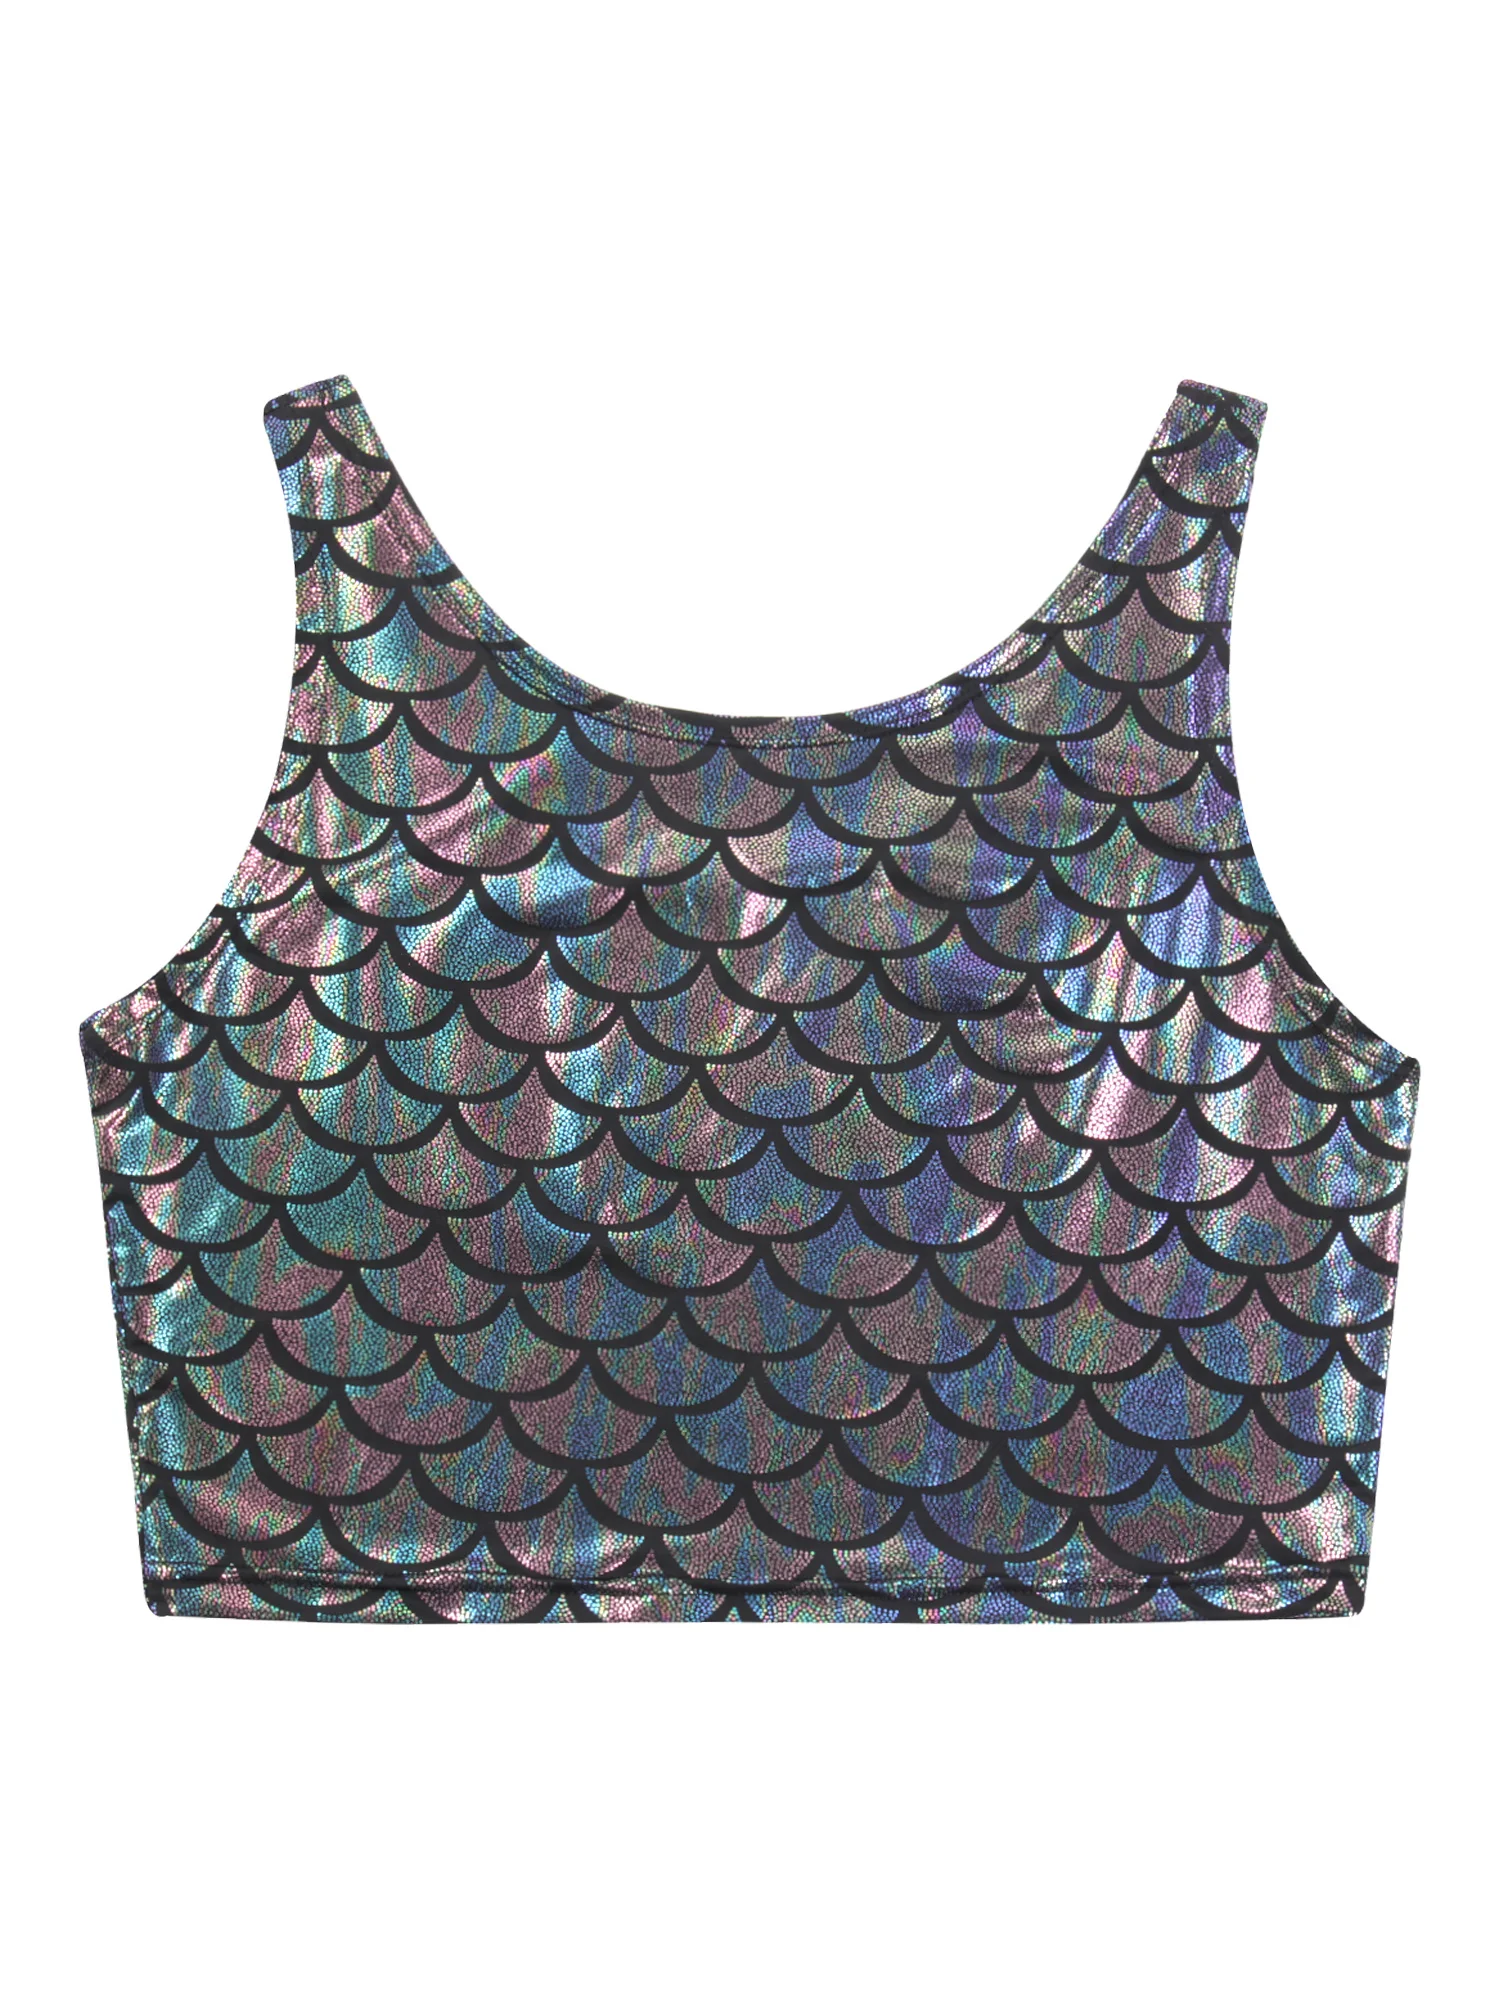 Women Fashion Sleeveless Scoop Neck Tank Camisole Metallic Shiny Fish Scale Print Crop Tops Bustier Club Night Out Vest Tops images - 6